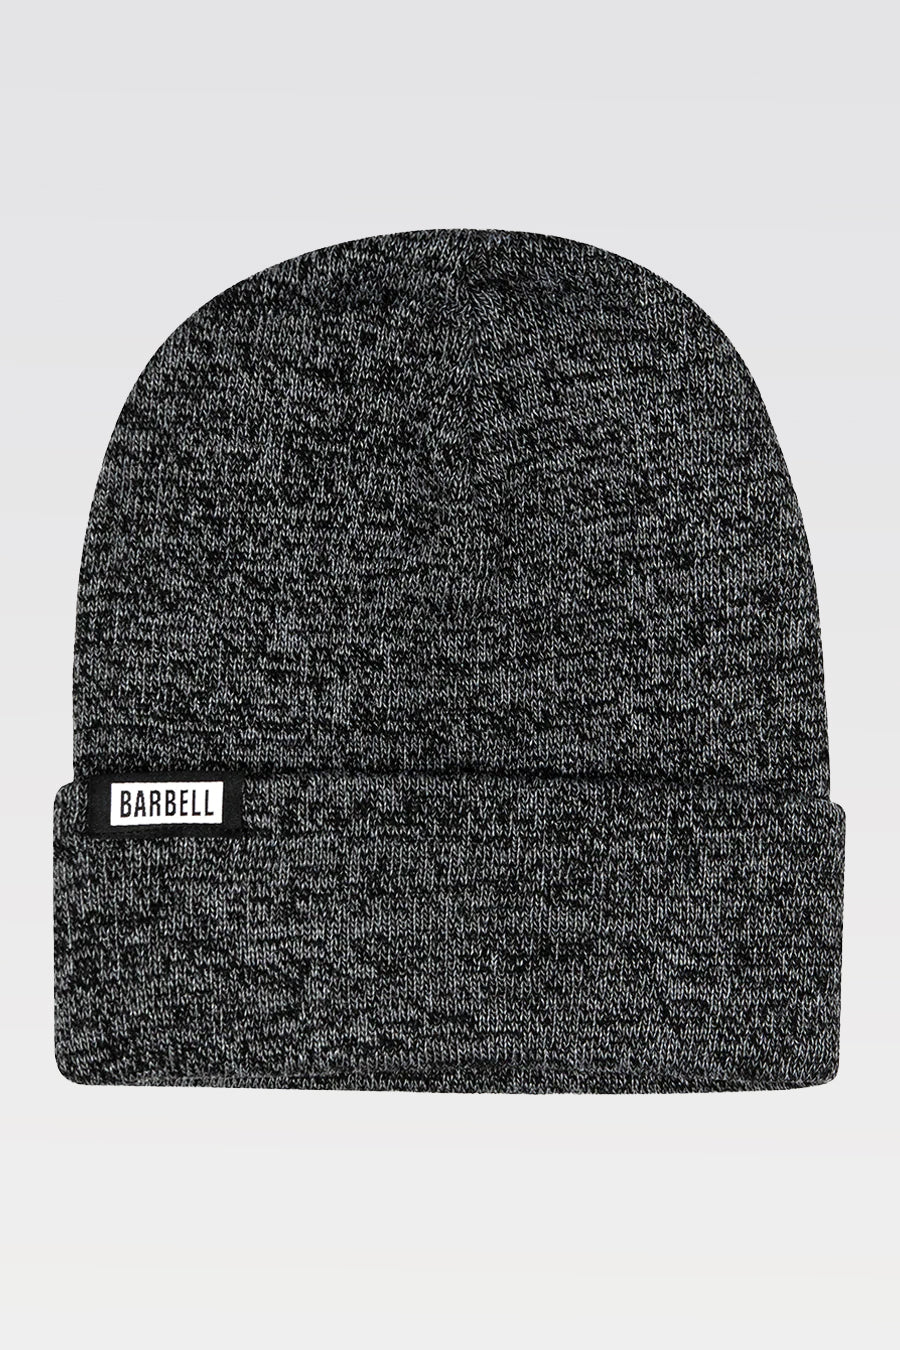 Barbell Beanie - Heather - photo from front #color_heather